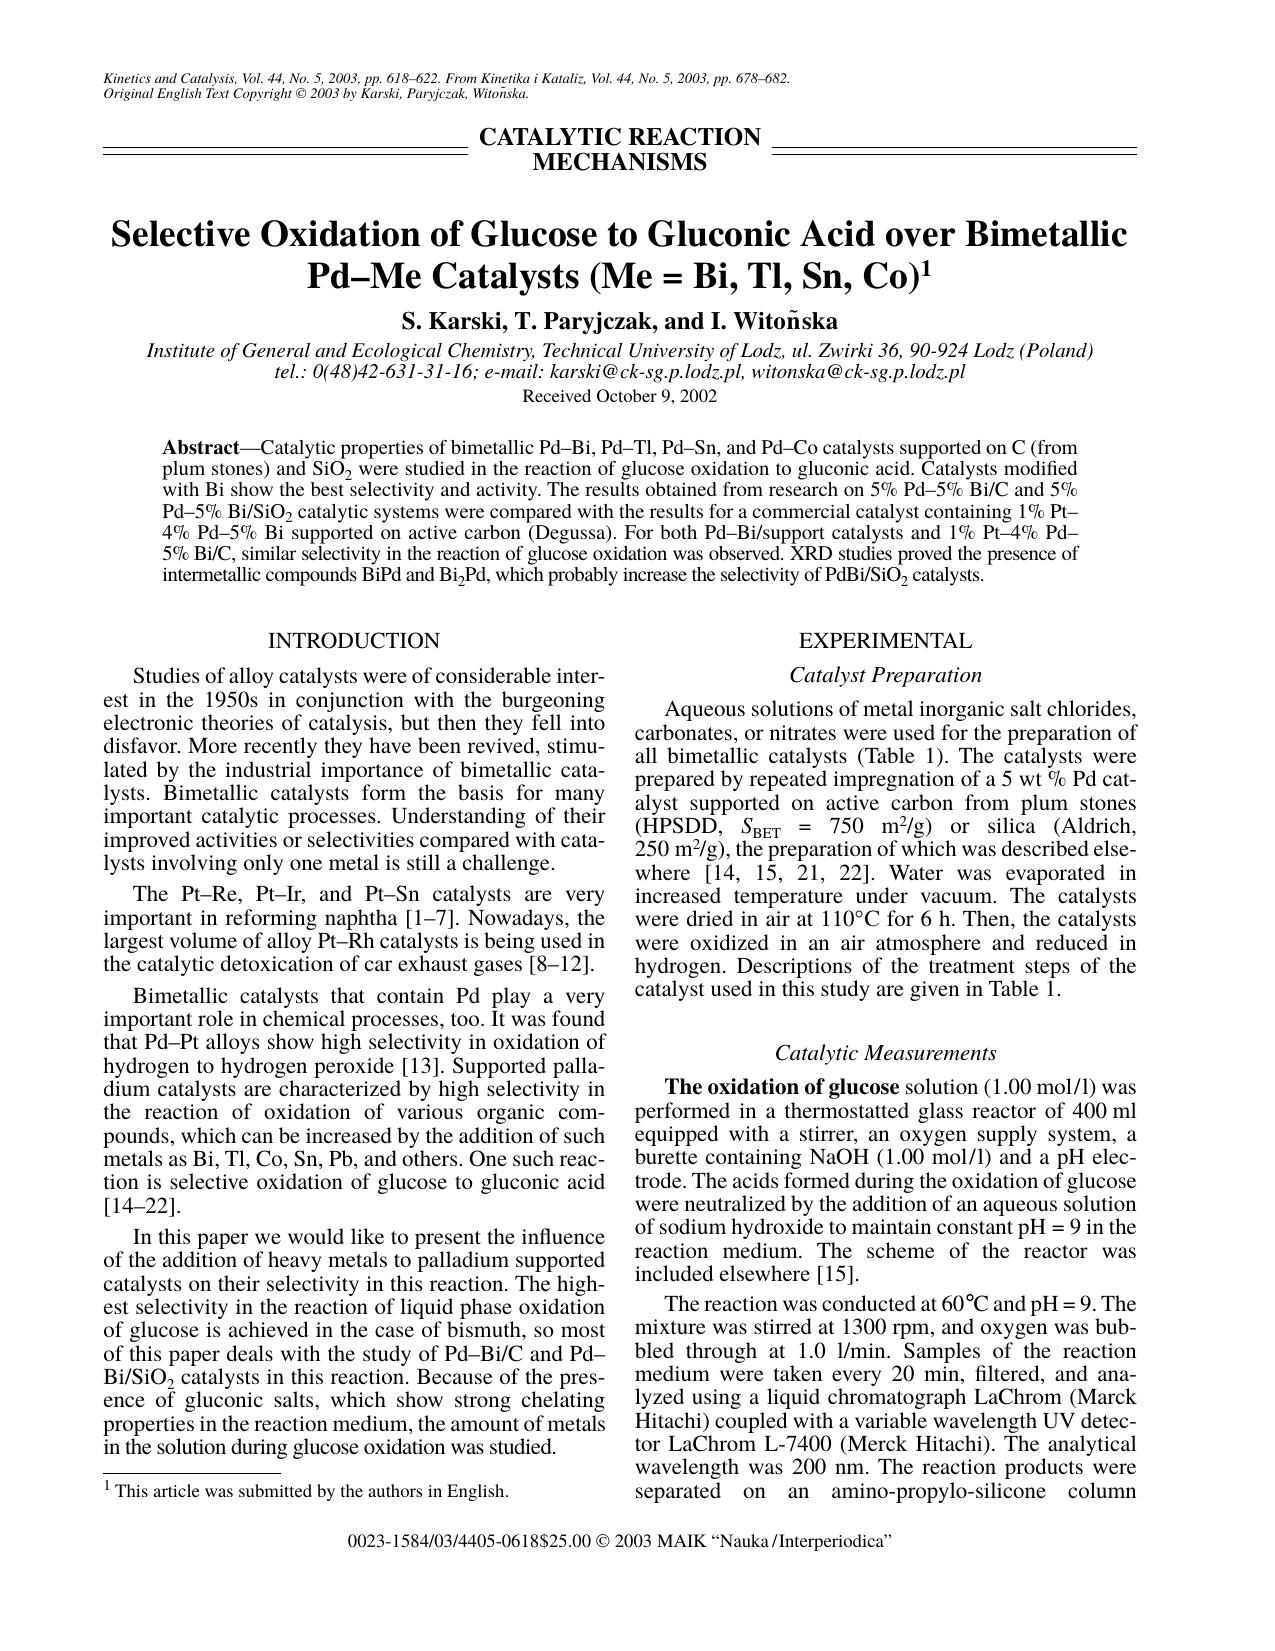 Selective Oxidation of Glucose to Gluconic Acid over Bimetallic Pd&#x2013;Me Catalysts (Me = Bi, Tl, Sn, Co) by Unknown